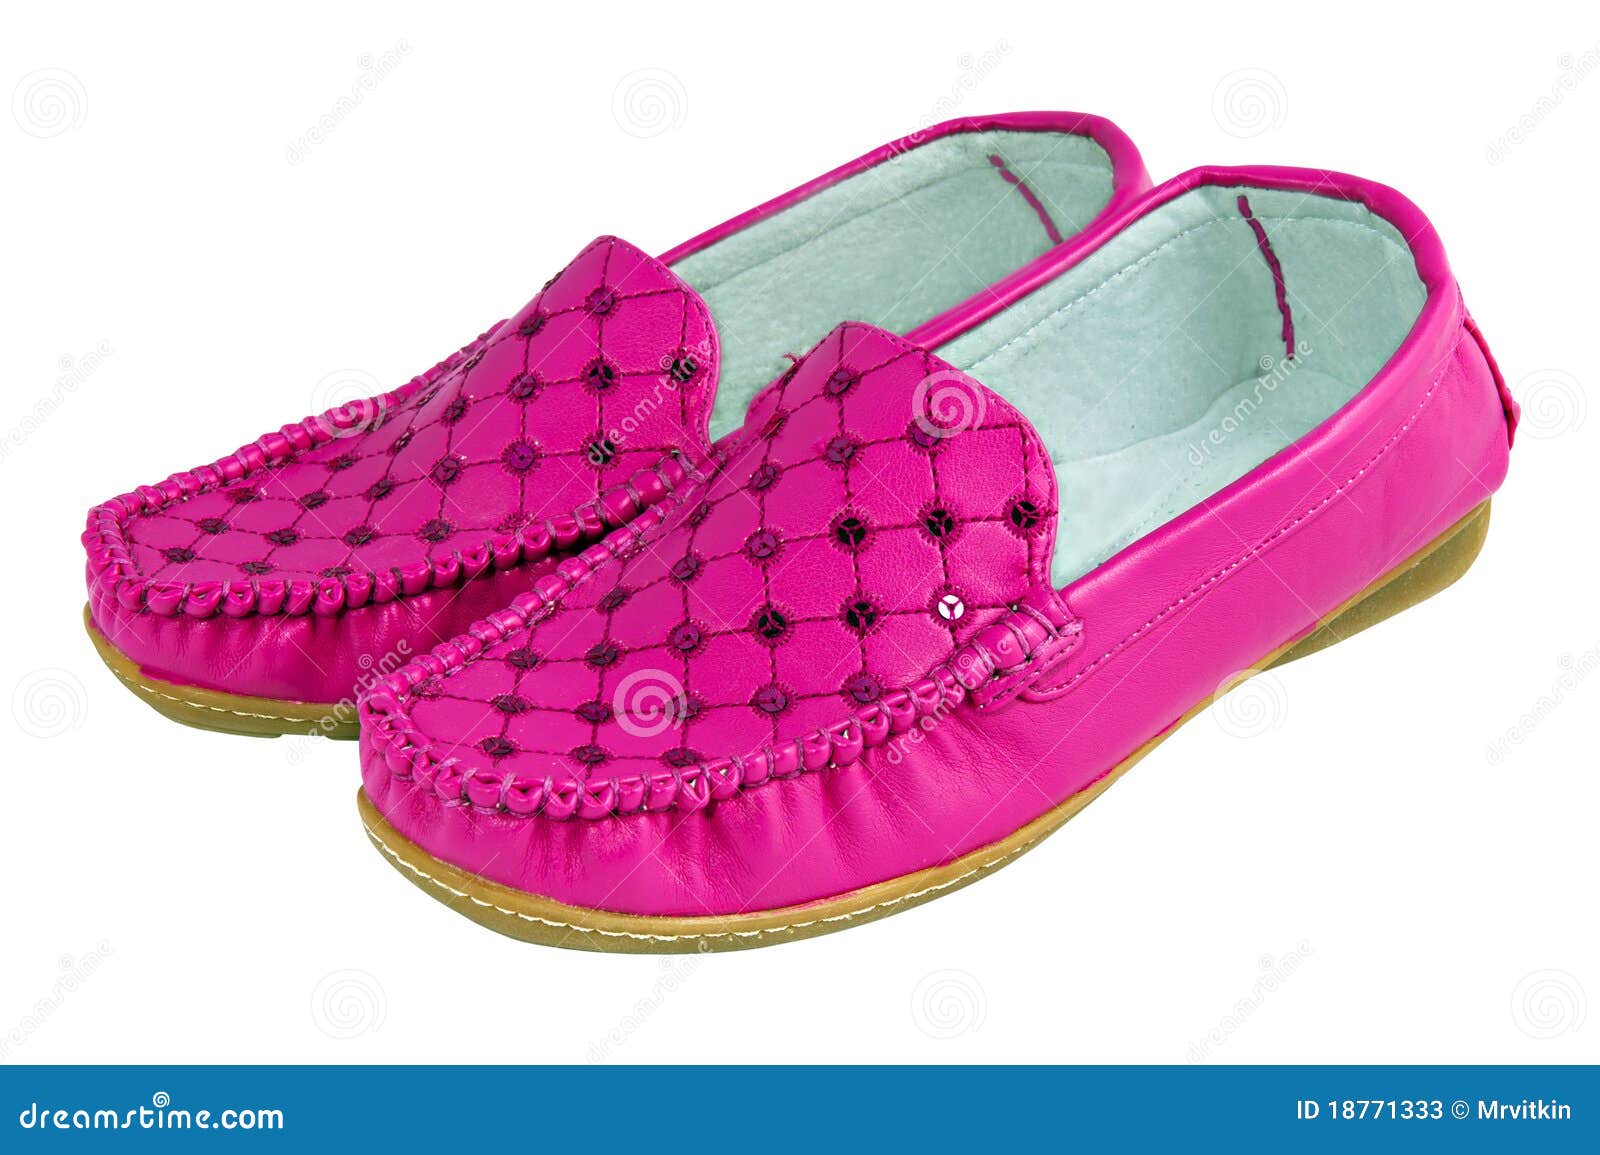 712 Barbie Shoes Royalty-Free Images, Stock Photos & Pictures